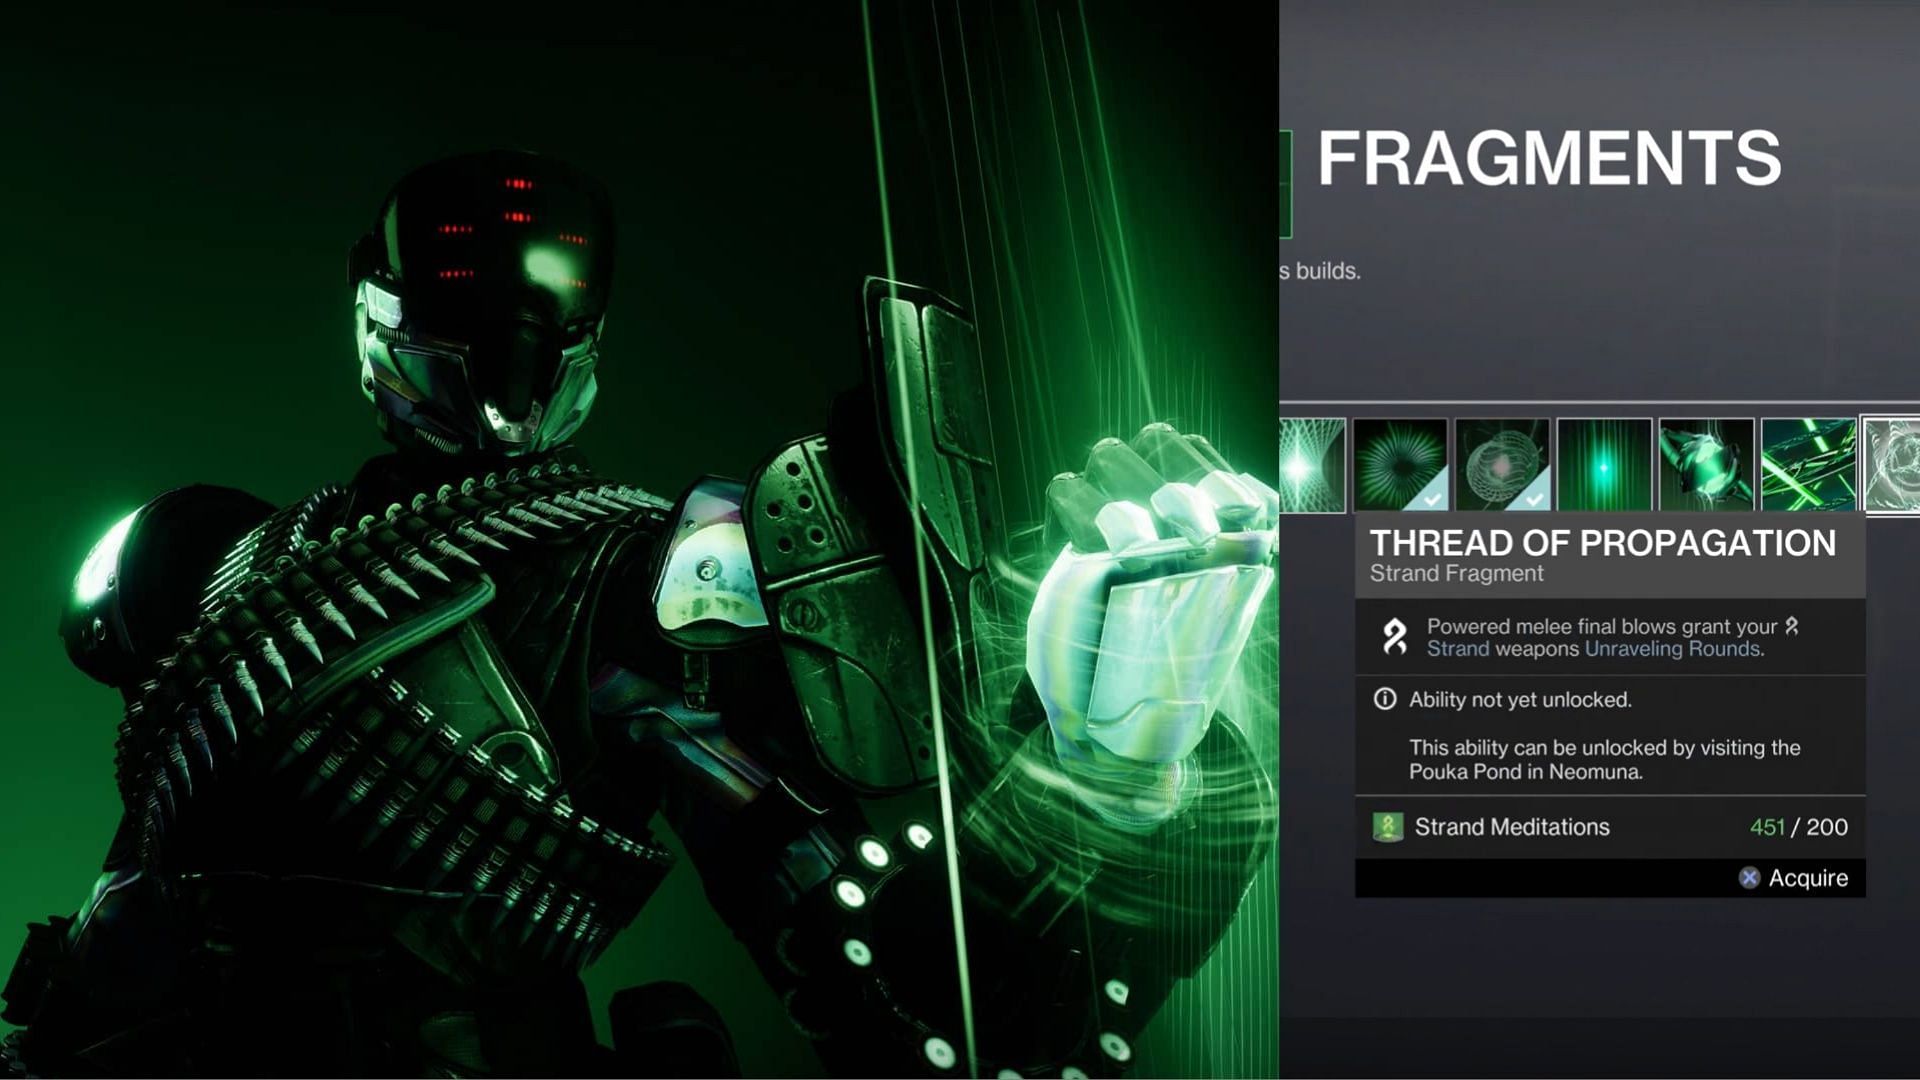 Destiny 2 Titan on the left and description of Thread of Propagation on the right.